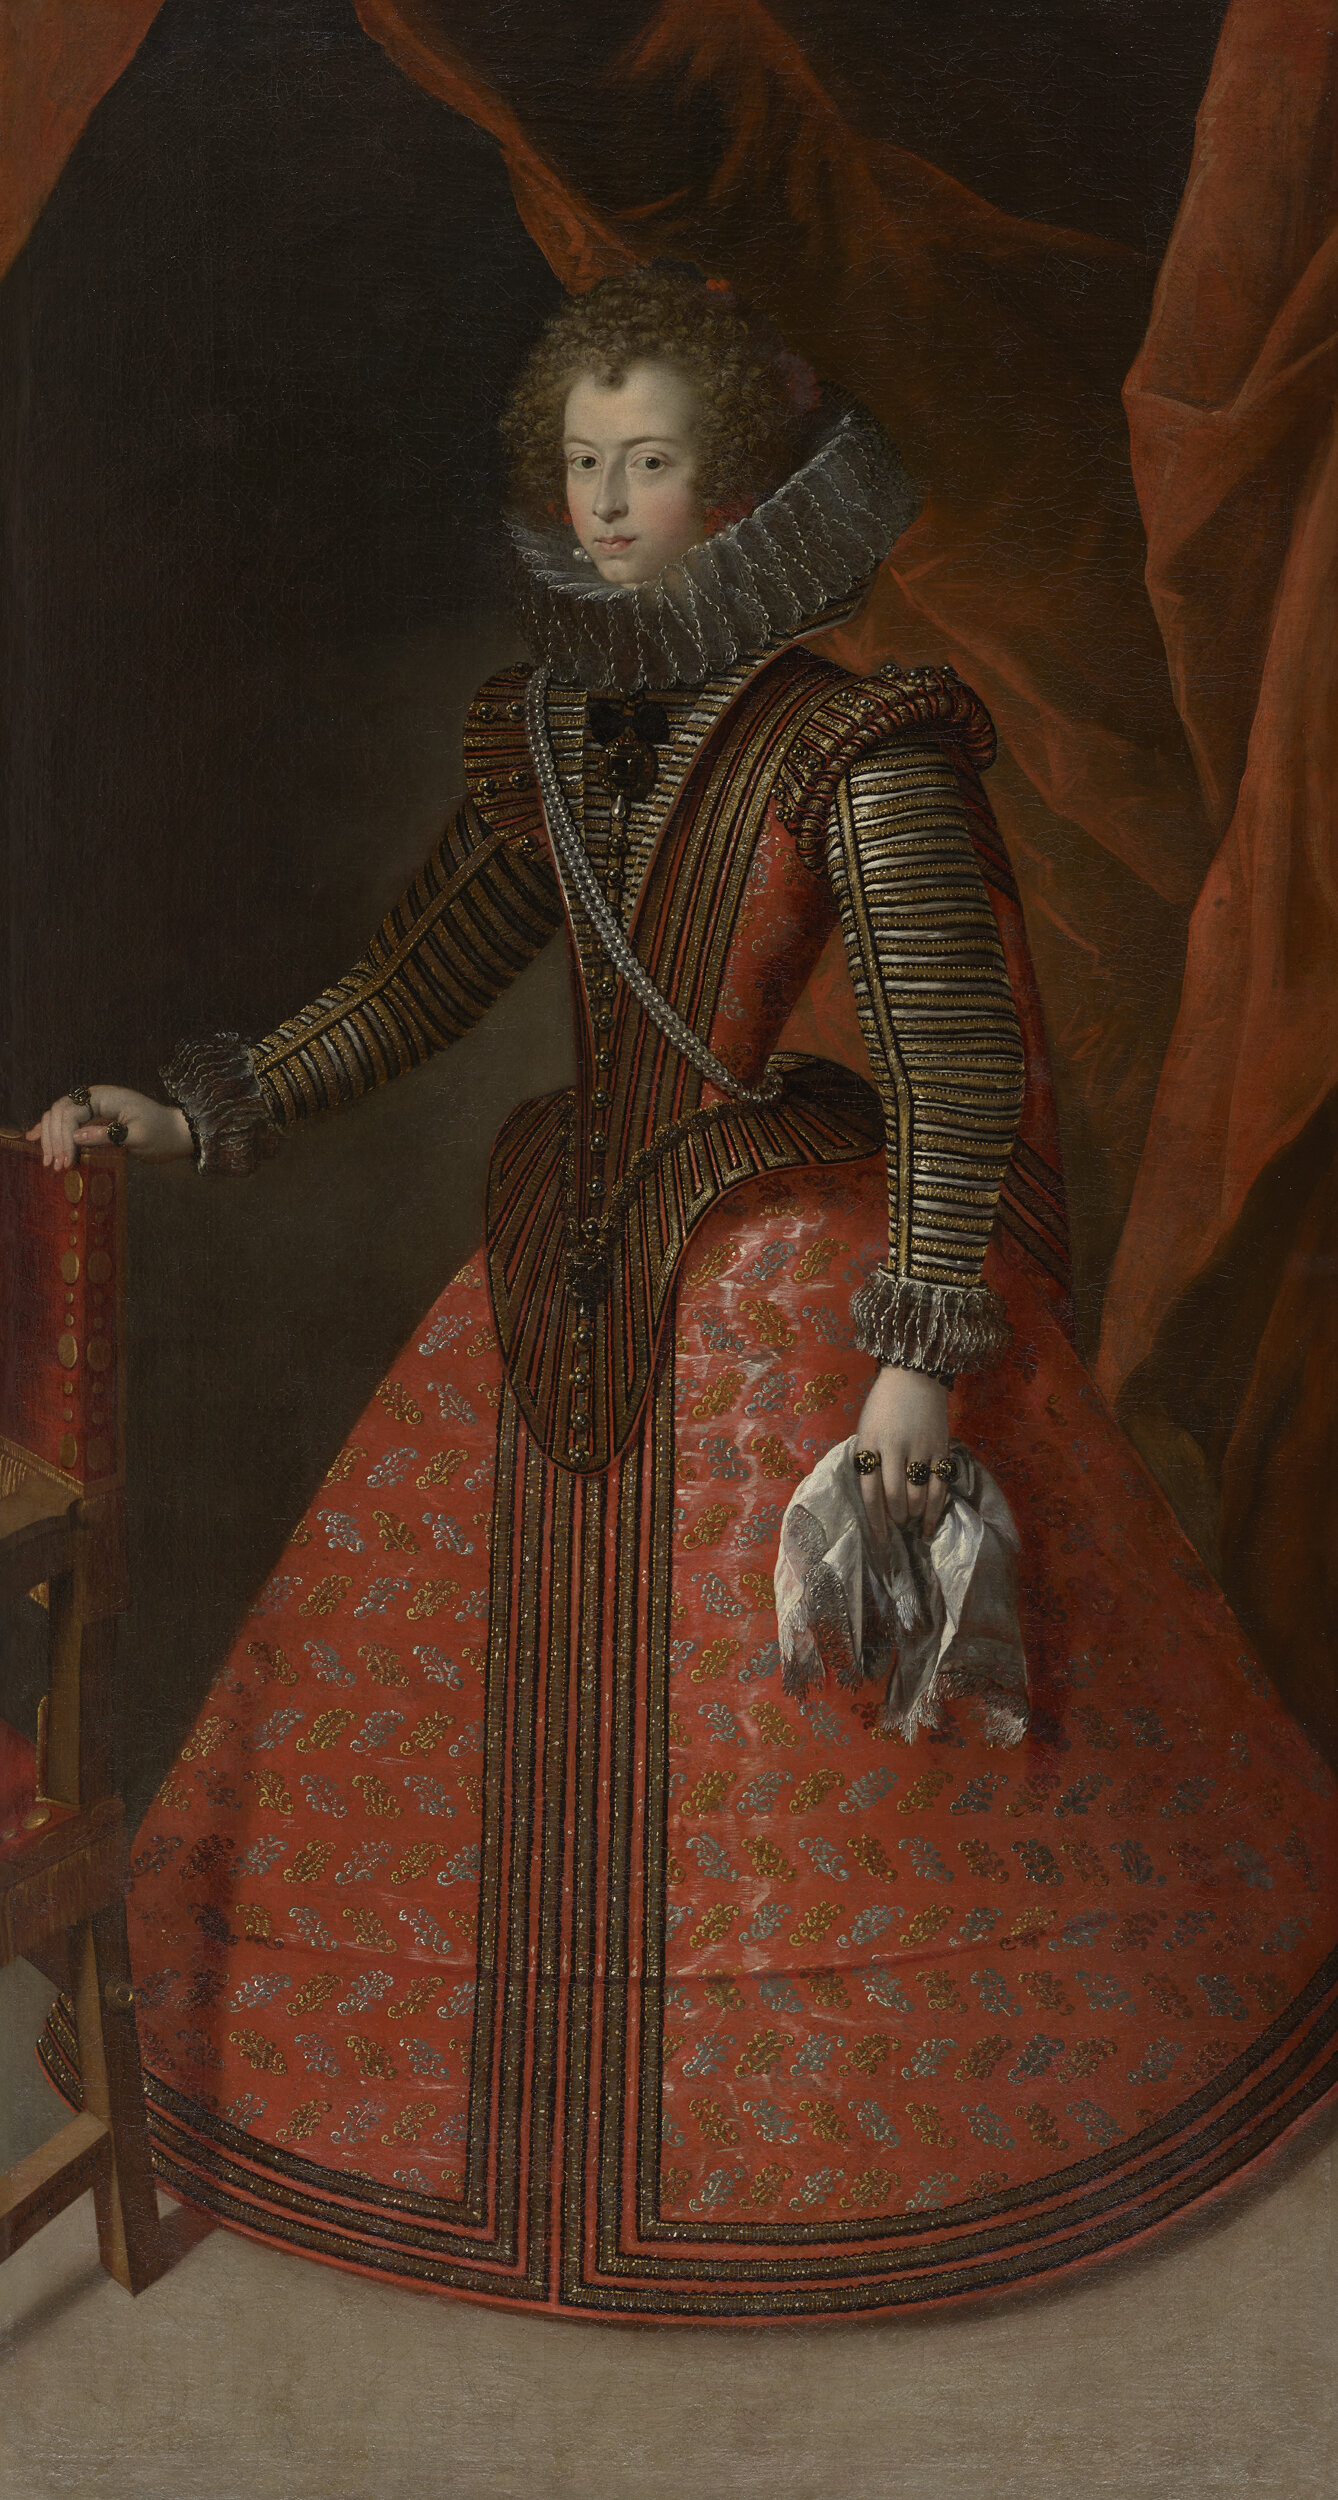  Felipe Diriksen, Portrait of Infanta María Ana de Austria, 1630, oil on canvas, Museum Purchase: Funds provided by William and Helen Jo Whitsell; European and American Art Council; John S. Ettelson Fund of the Oregon Community Foundation; Nani S. Wa